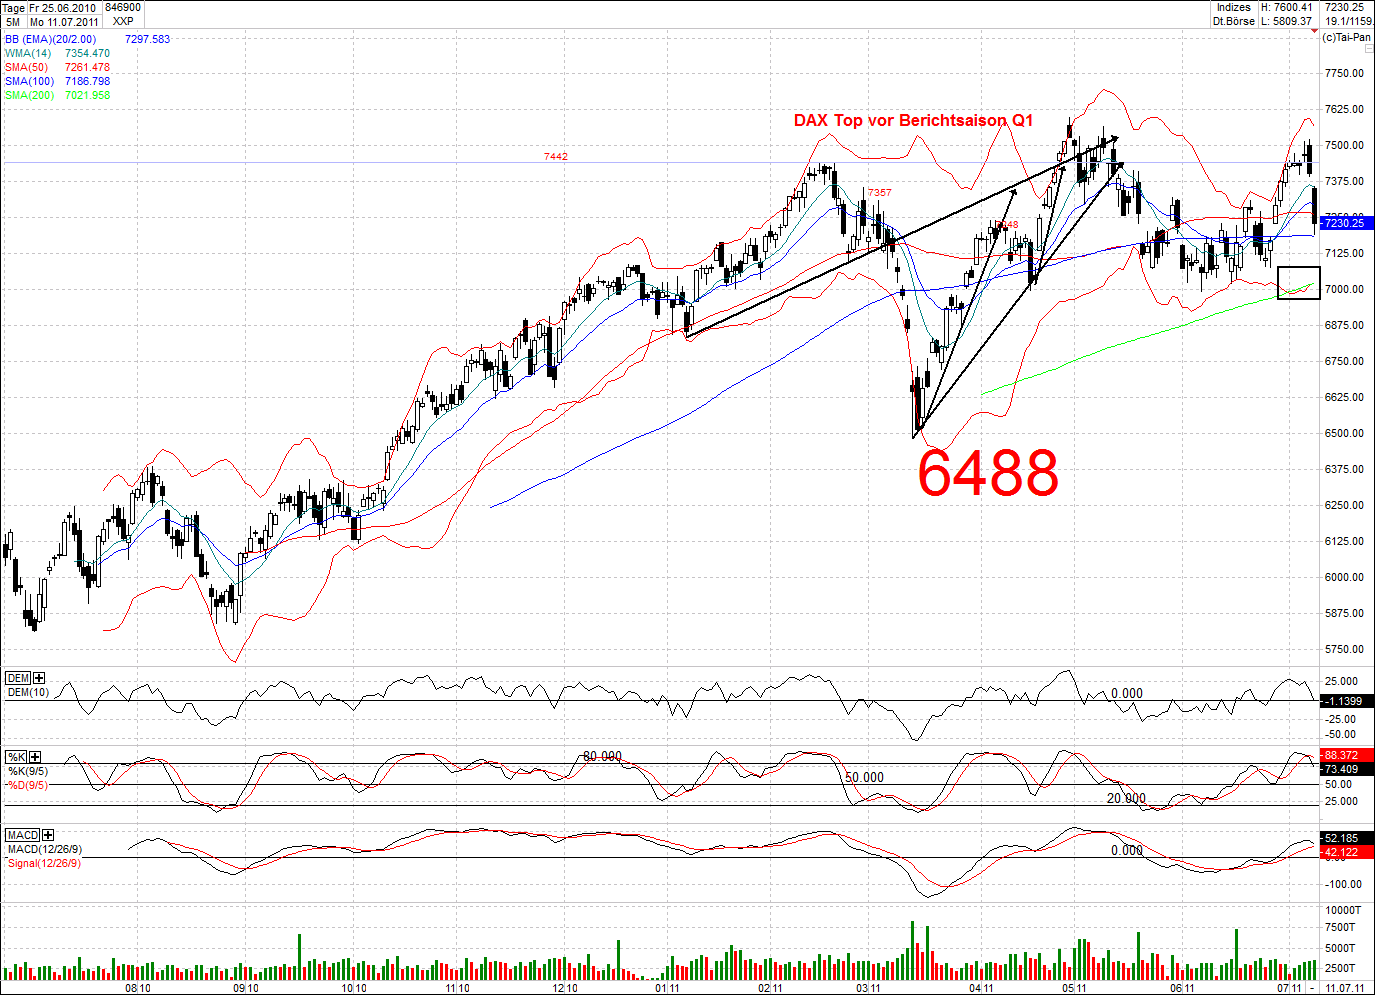 Quo Vadis Dax 2011 - All Time High? 419643